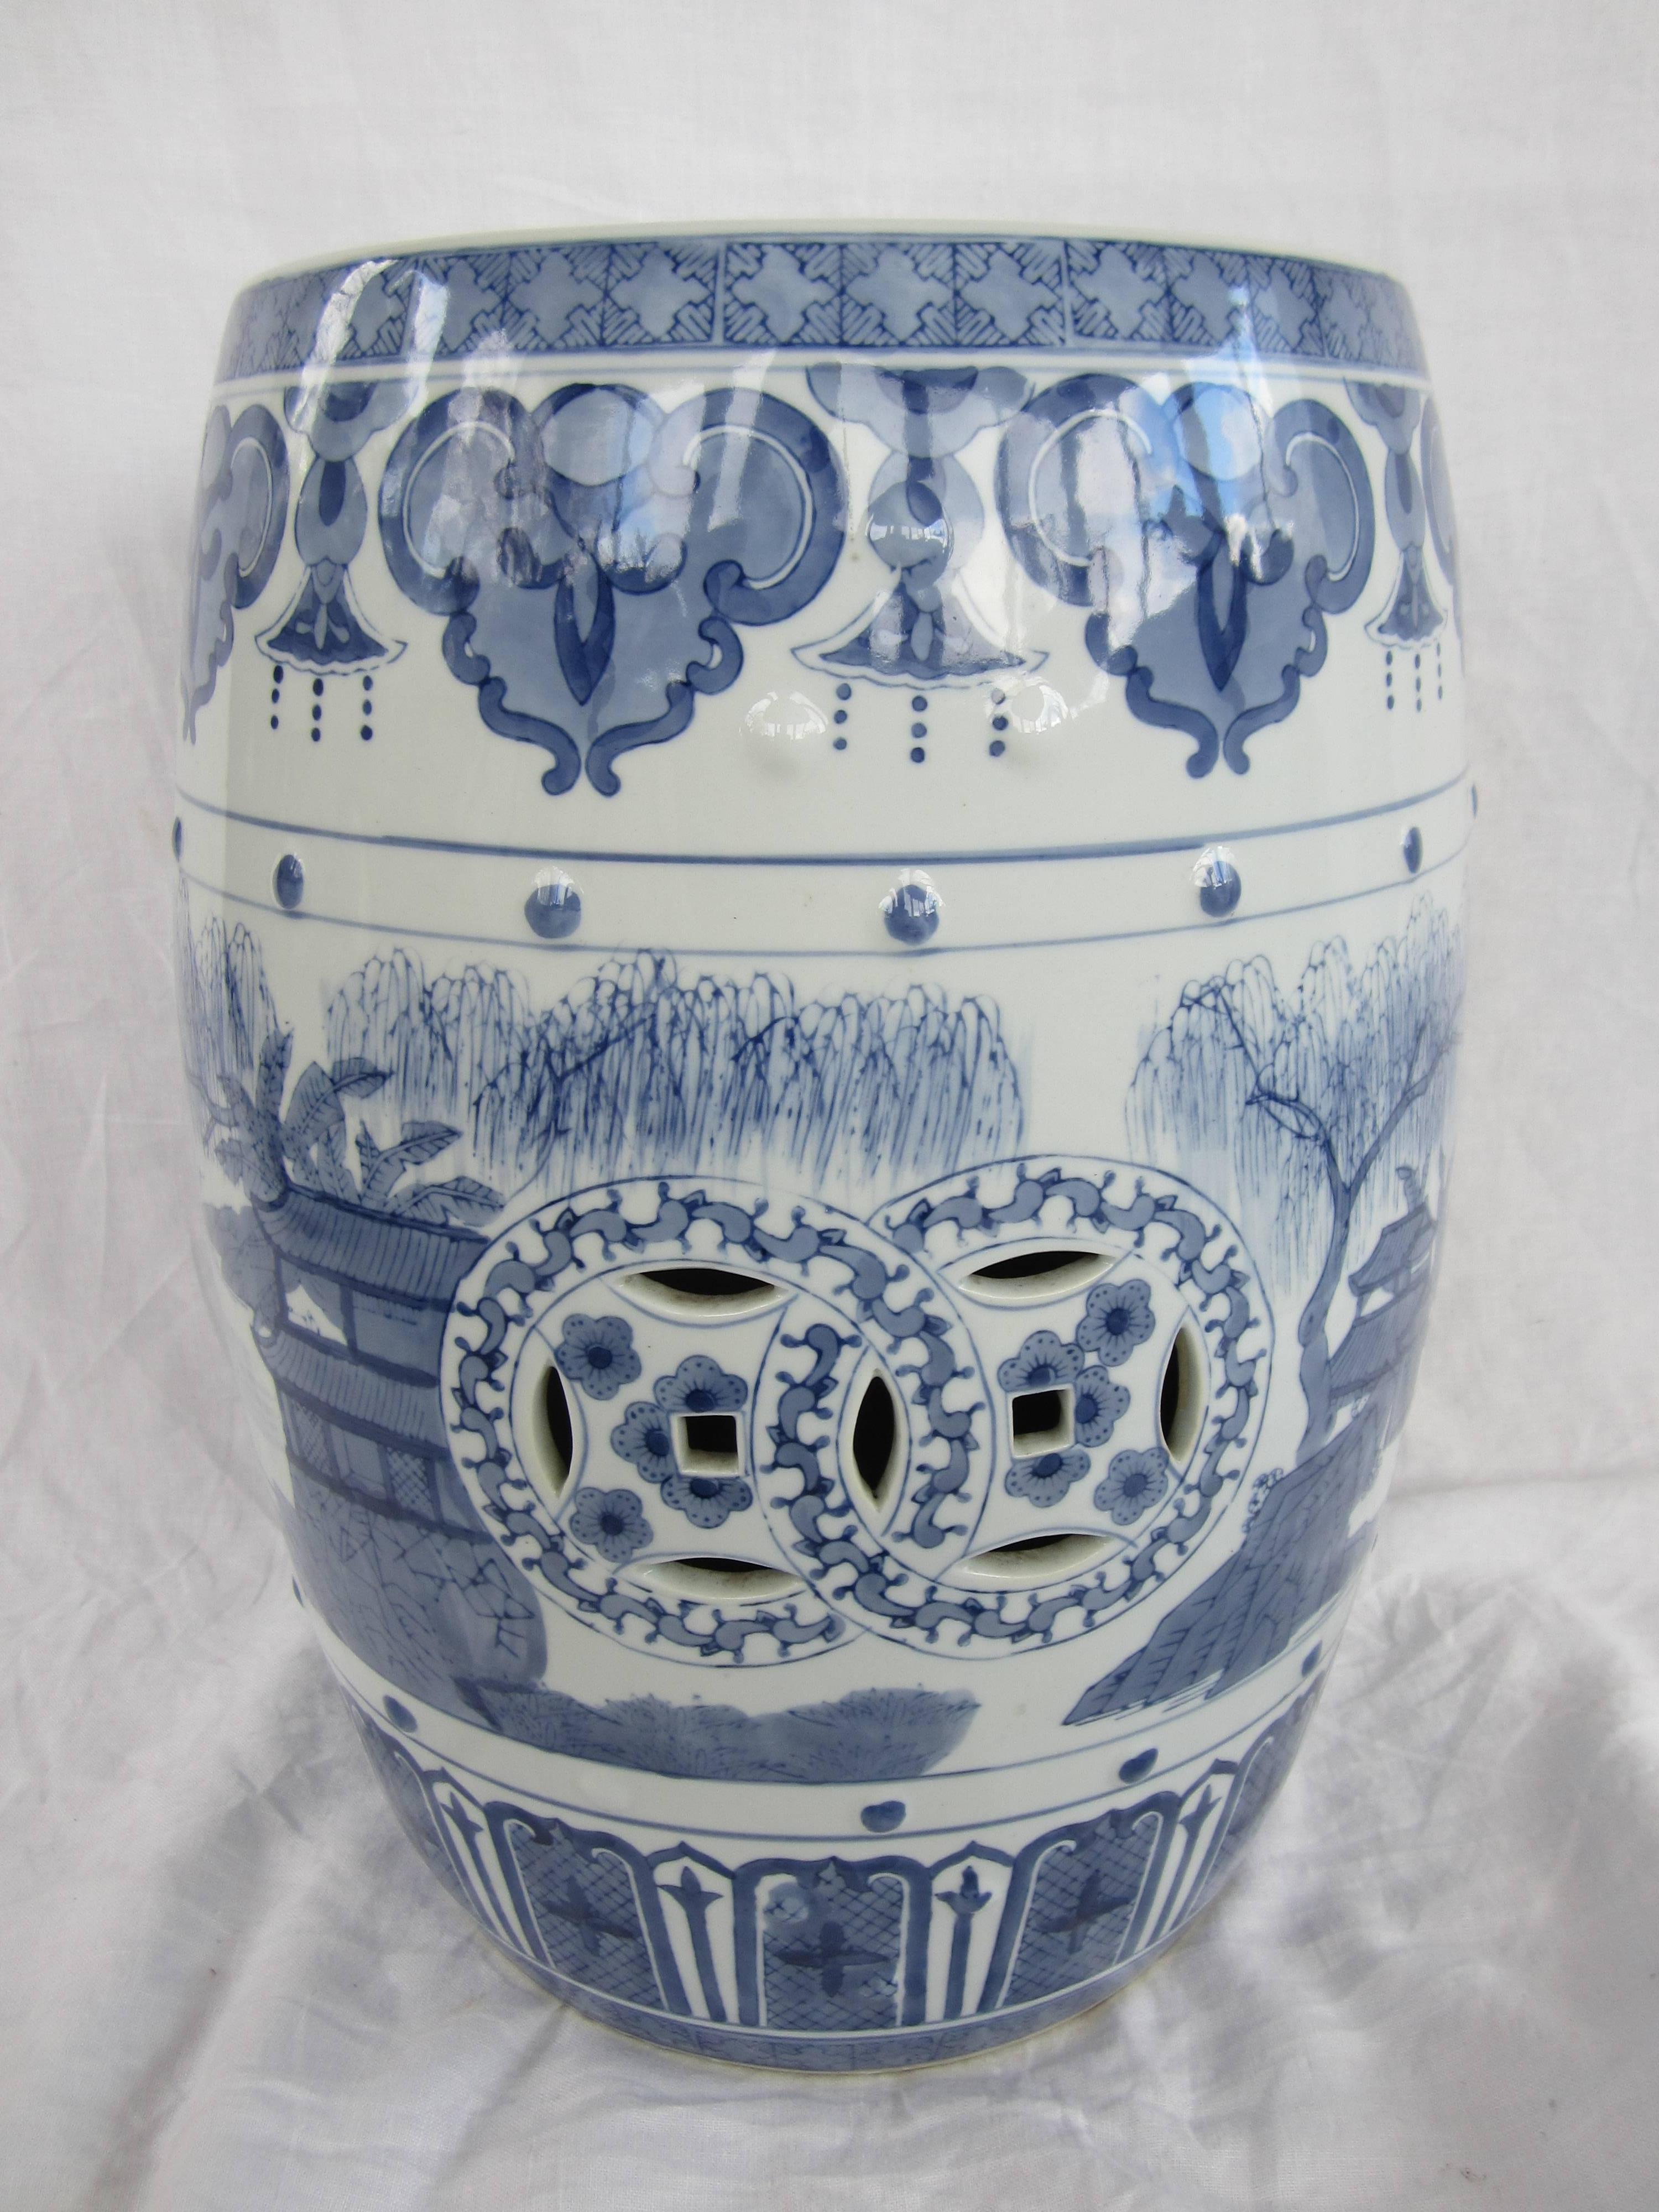 1970s Chinese blue and white garden stool.